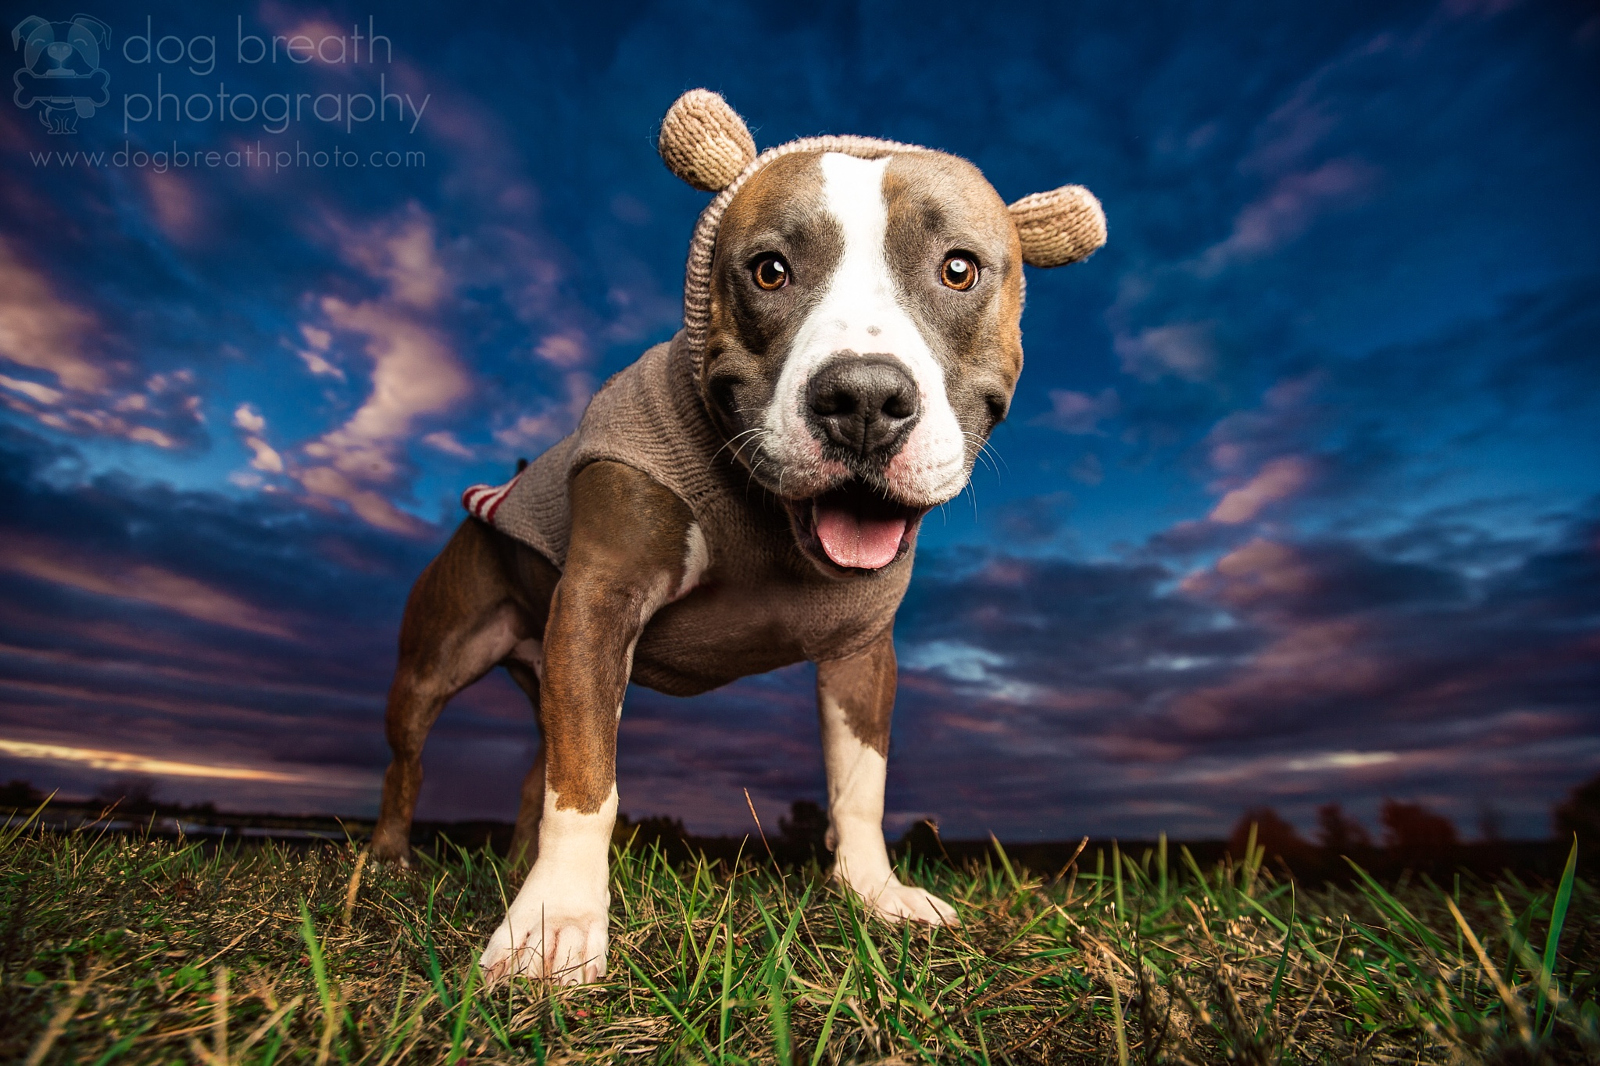 Meet One of the Best Dog Photographers on 500px... and in the World